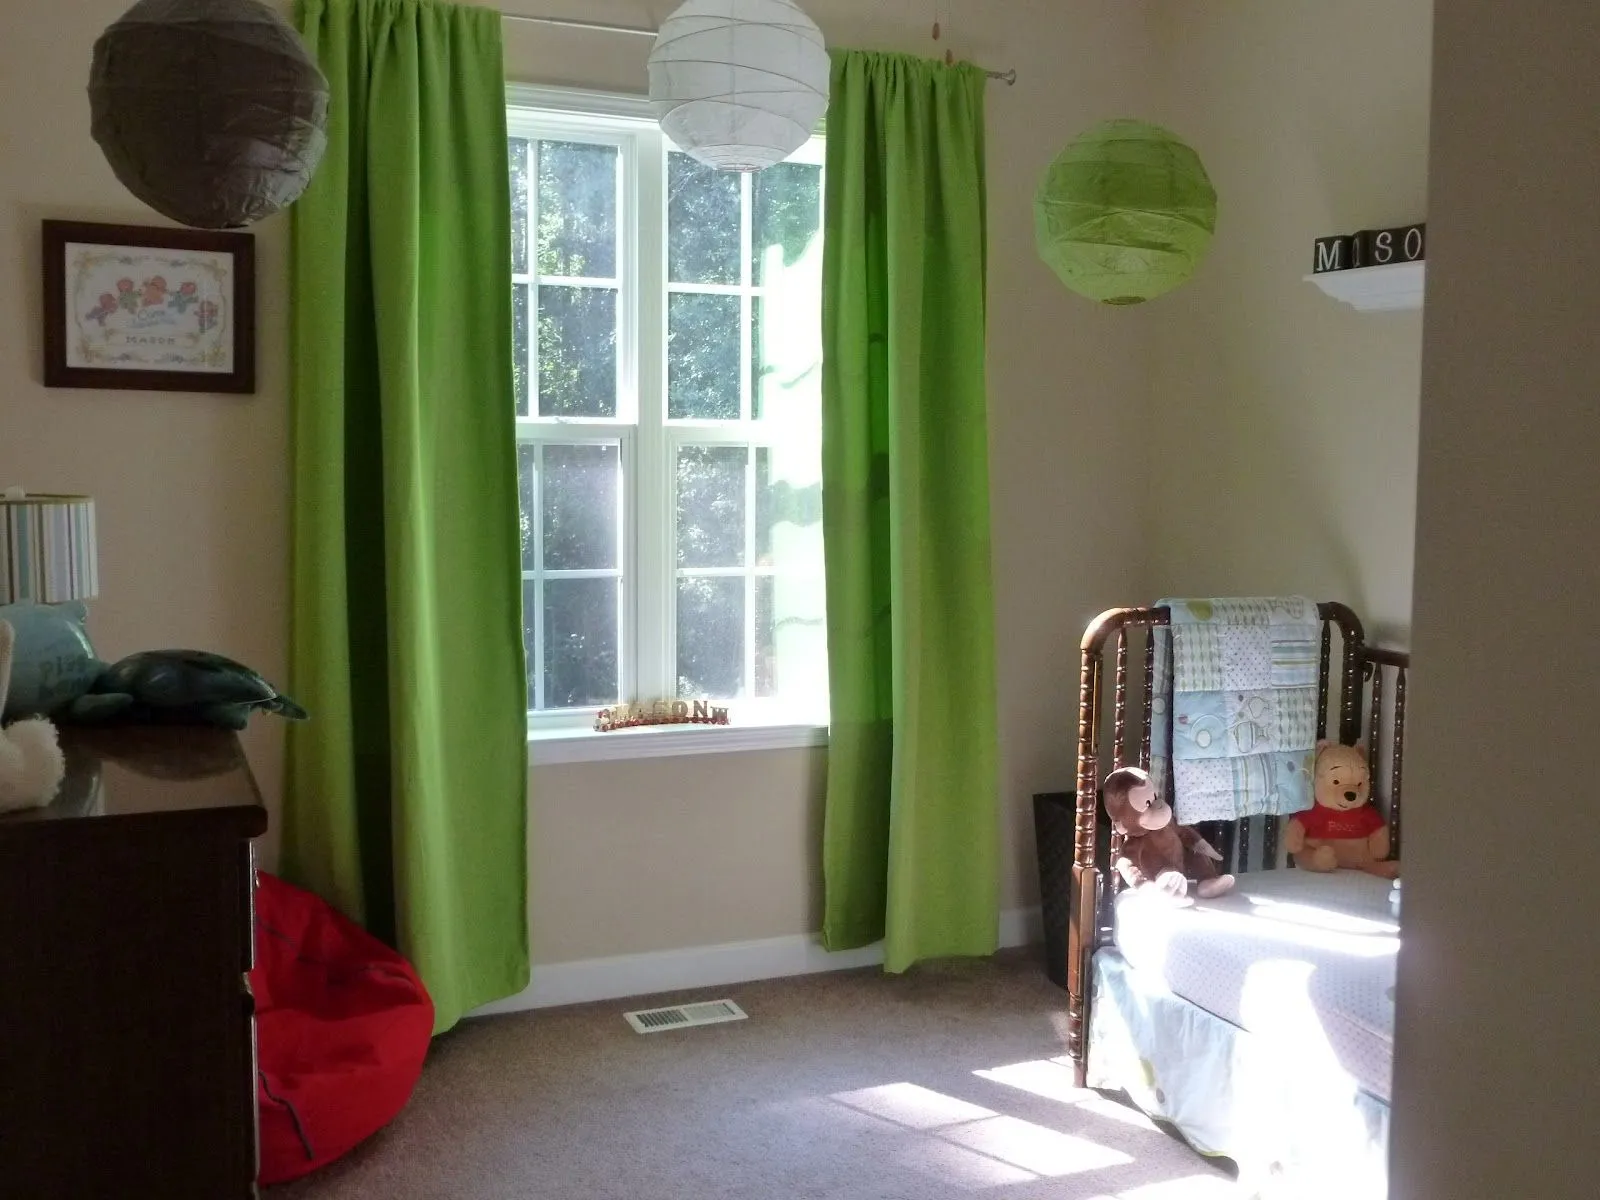 interior-green-fabric-window-curtains-on-the-hook-and-colorful-lantern-on-the-ceiling-connected-by-cream-wall-pleasing-look-of-master-bedroom-window-treatments-prettify-your-bedroom